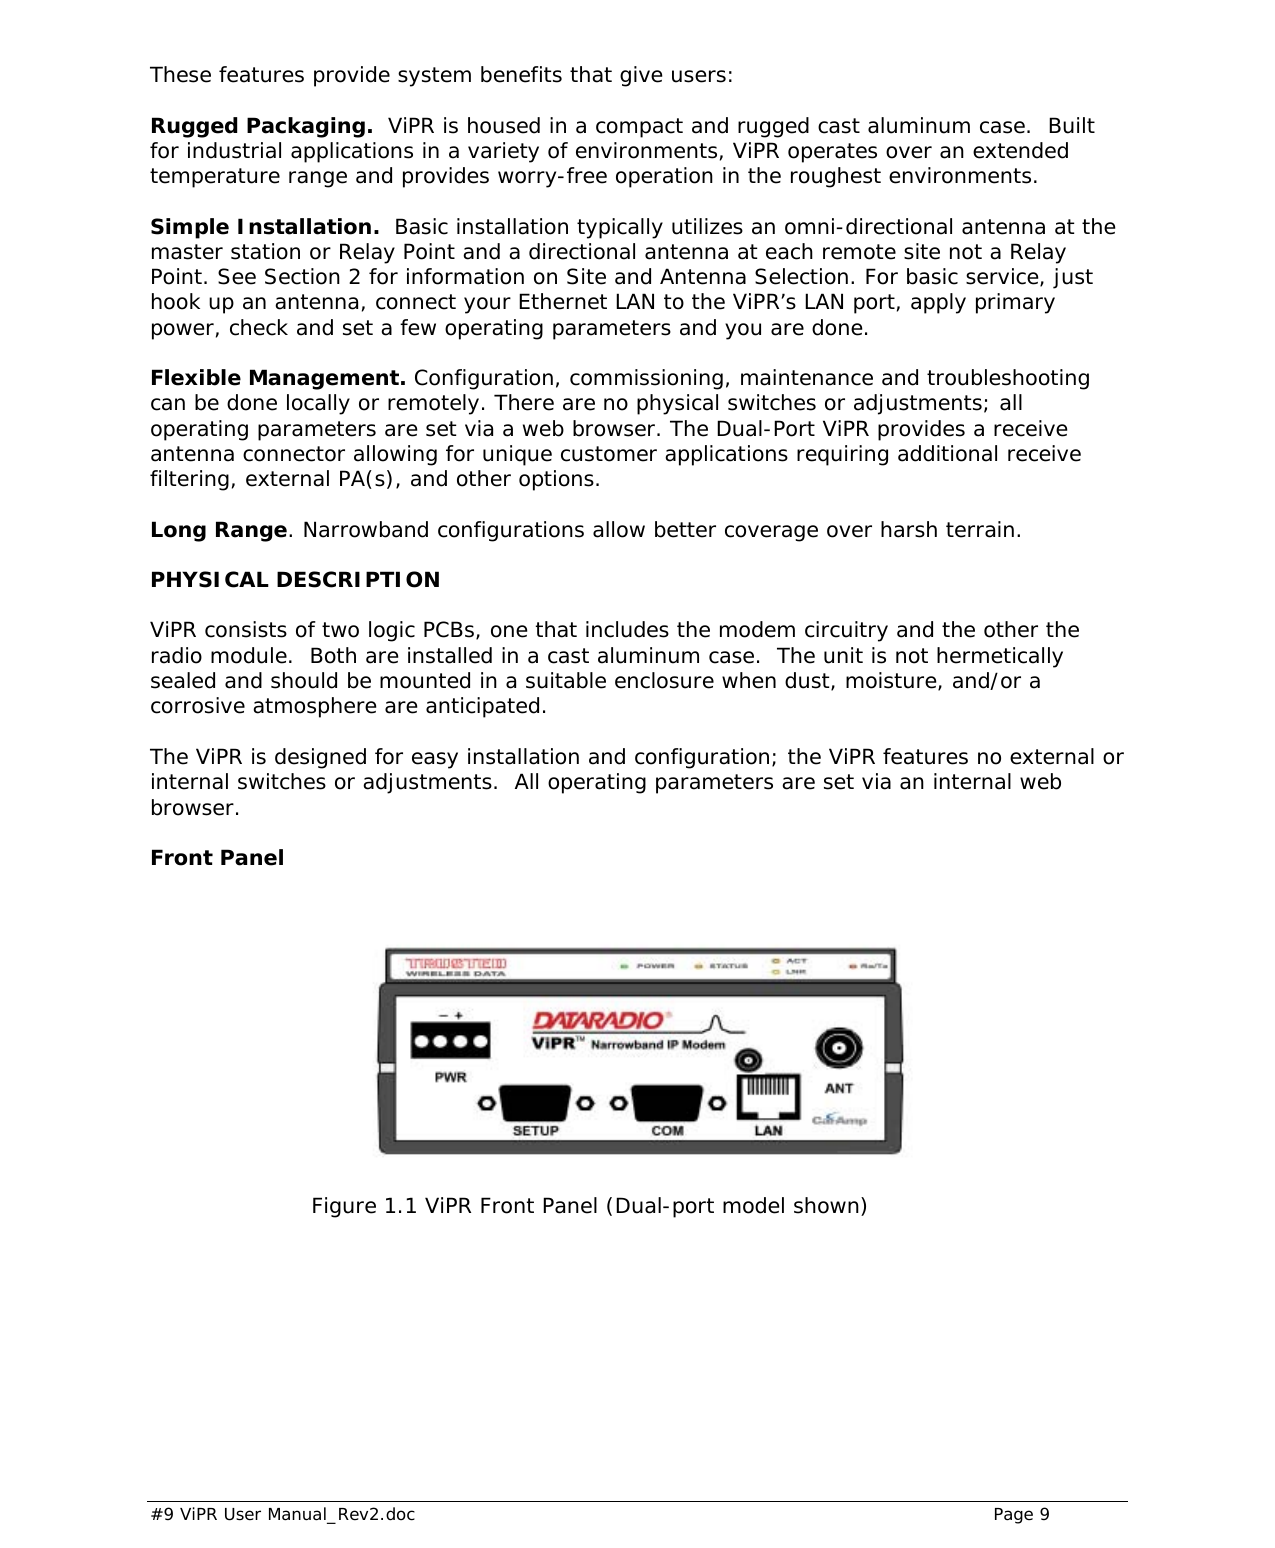  #9 ViPR User Manual_Rev2.doc    Page 9 These features provide system benefits that give users:  Rugged Packaging.  ViPR is housed in a compact and rugged cast aluminum case.  Built for industrial applications in a variety of environments, ViPR operates over an extended temperature range and provides worry-free operation in the roughest environments. Simple Installation.  Basic installation typically utilizes an omni-directional antenna at the master station or Relay Point and a directional antenna at each remote site not a Relay Point. See Section 2 for information on Site and Antenna Selection. For basic service, just hook up an antenna, connect your Ethernet LAN to the ViPR’s LAN port, apply primary power, check and set a few operating parameters and you are done.   Flexible Management. Configuration, commissioning, maintenance and troubleshooting can be done locally or remotely. There are no physical switches or adjustments; all operating parameters are set via a web browser. The Dual-Port ViPR provides a receive antenna connector allowing for unique customer applications requiring additional receive filtering, external PA(s), and other options. Long Range. Narrowband configurations allow better coverage over harsh terrain.  PHYSICAL DESCRIPTION ViPR consists of two logic PCBs, one that includes the modem circuitry and the other the radio module.  Both are installed in a cast aluminum case.  The unit is not hermetically sealed and should be mounted in a suitable enclosure when dust, moisture, and/or a corrosive atmosphere are anticipated.   The ViPR is designed for easy installation and configuration; the ViPR features no external or internal switches or adjustments.  All operating parameters are set via an internal web browser.  Front Panel                          Figure 1.1 ViPR Front Panel (Dual-port model shown) 